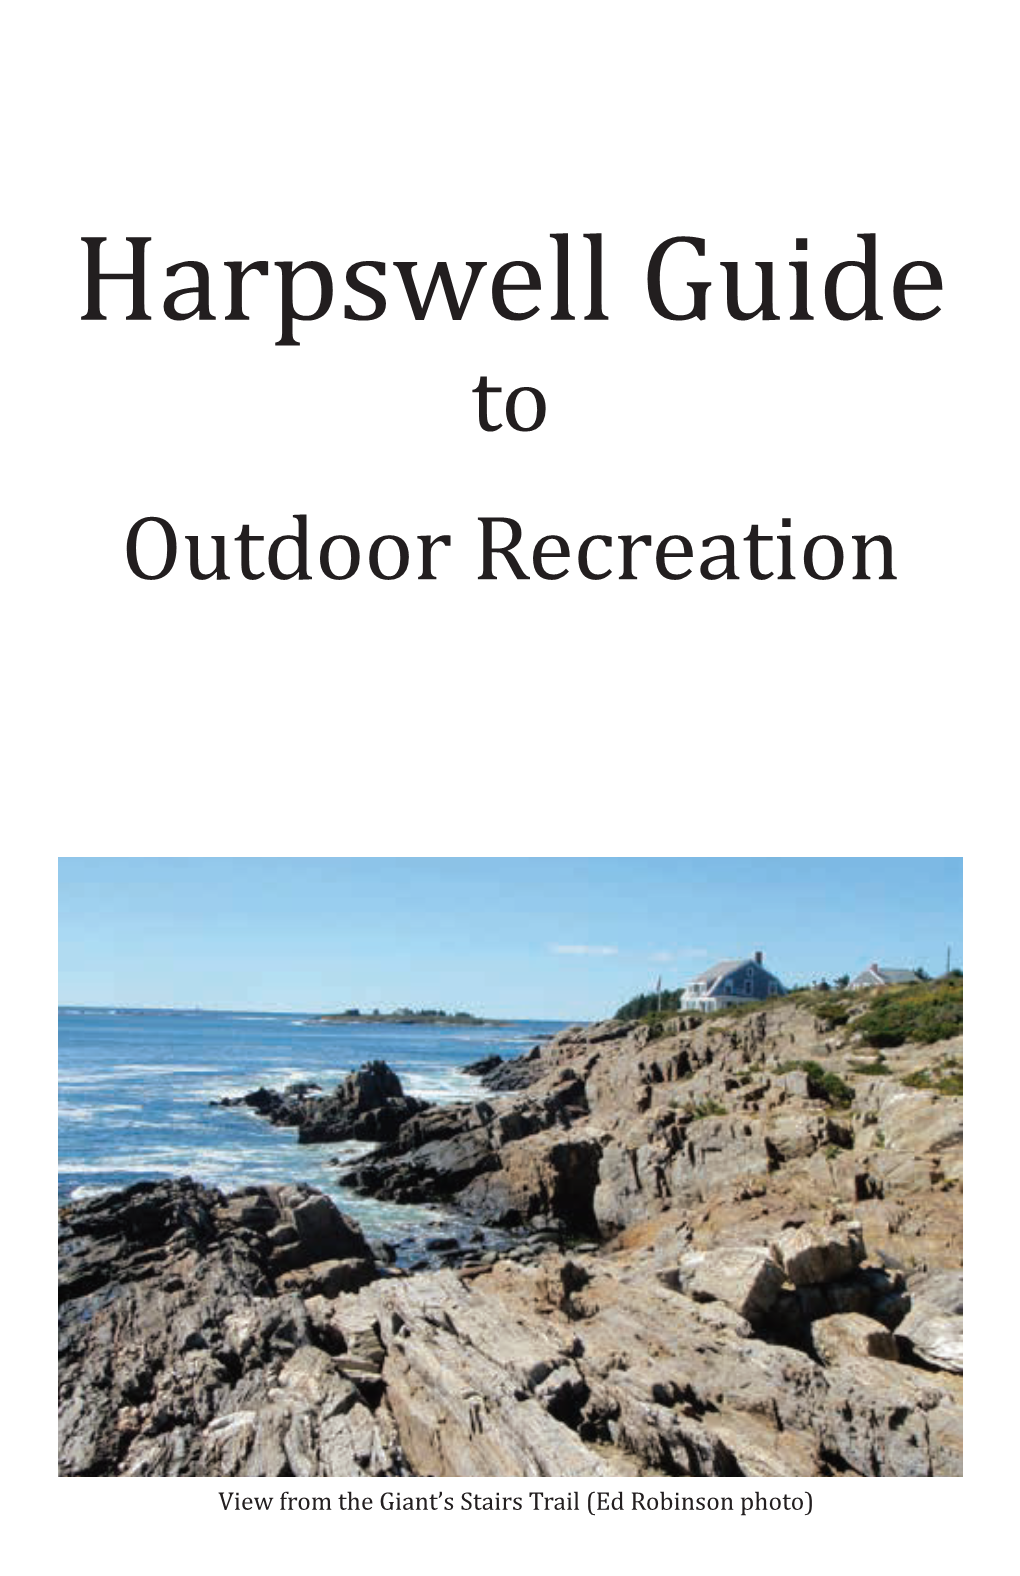 Harpswell Guide to Outdoor Recreation